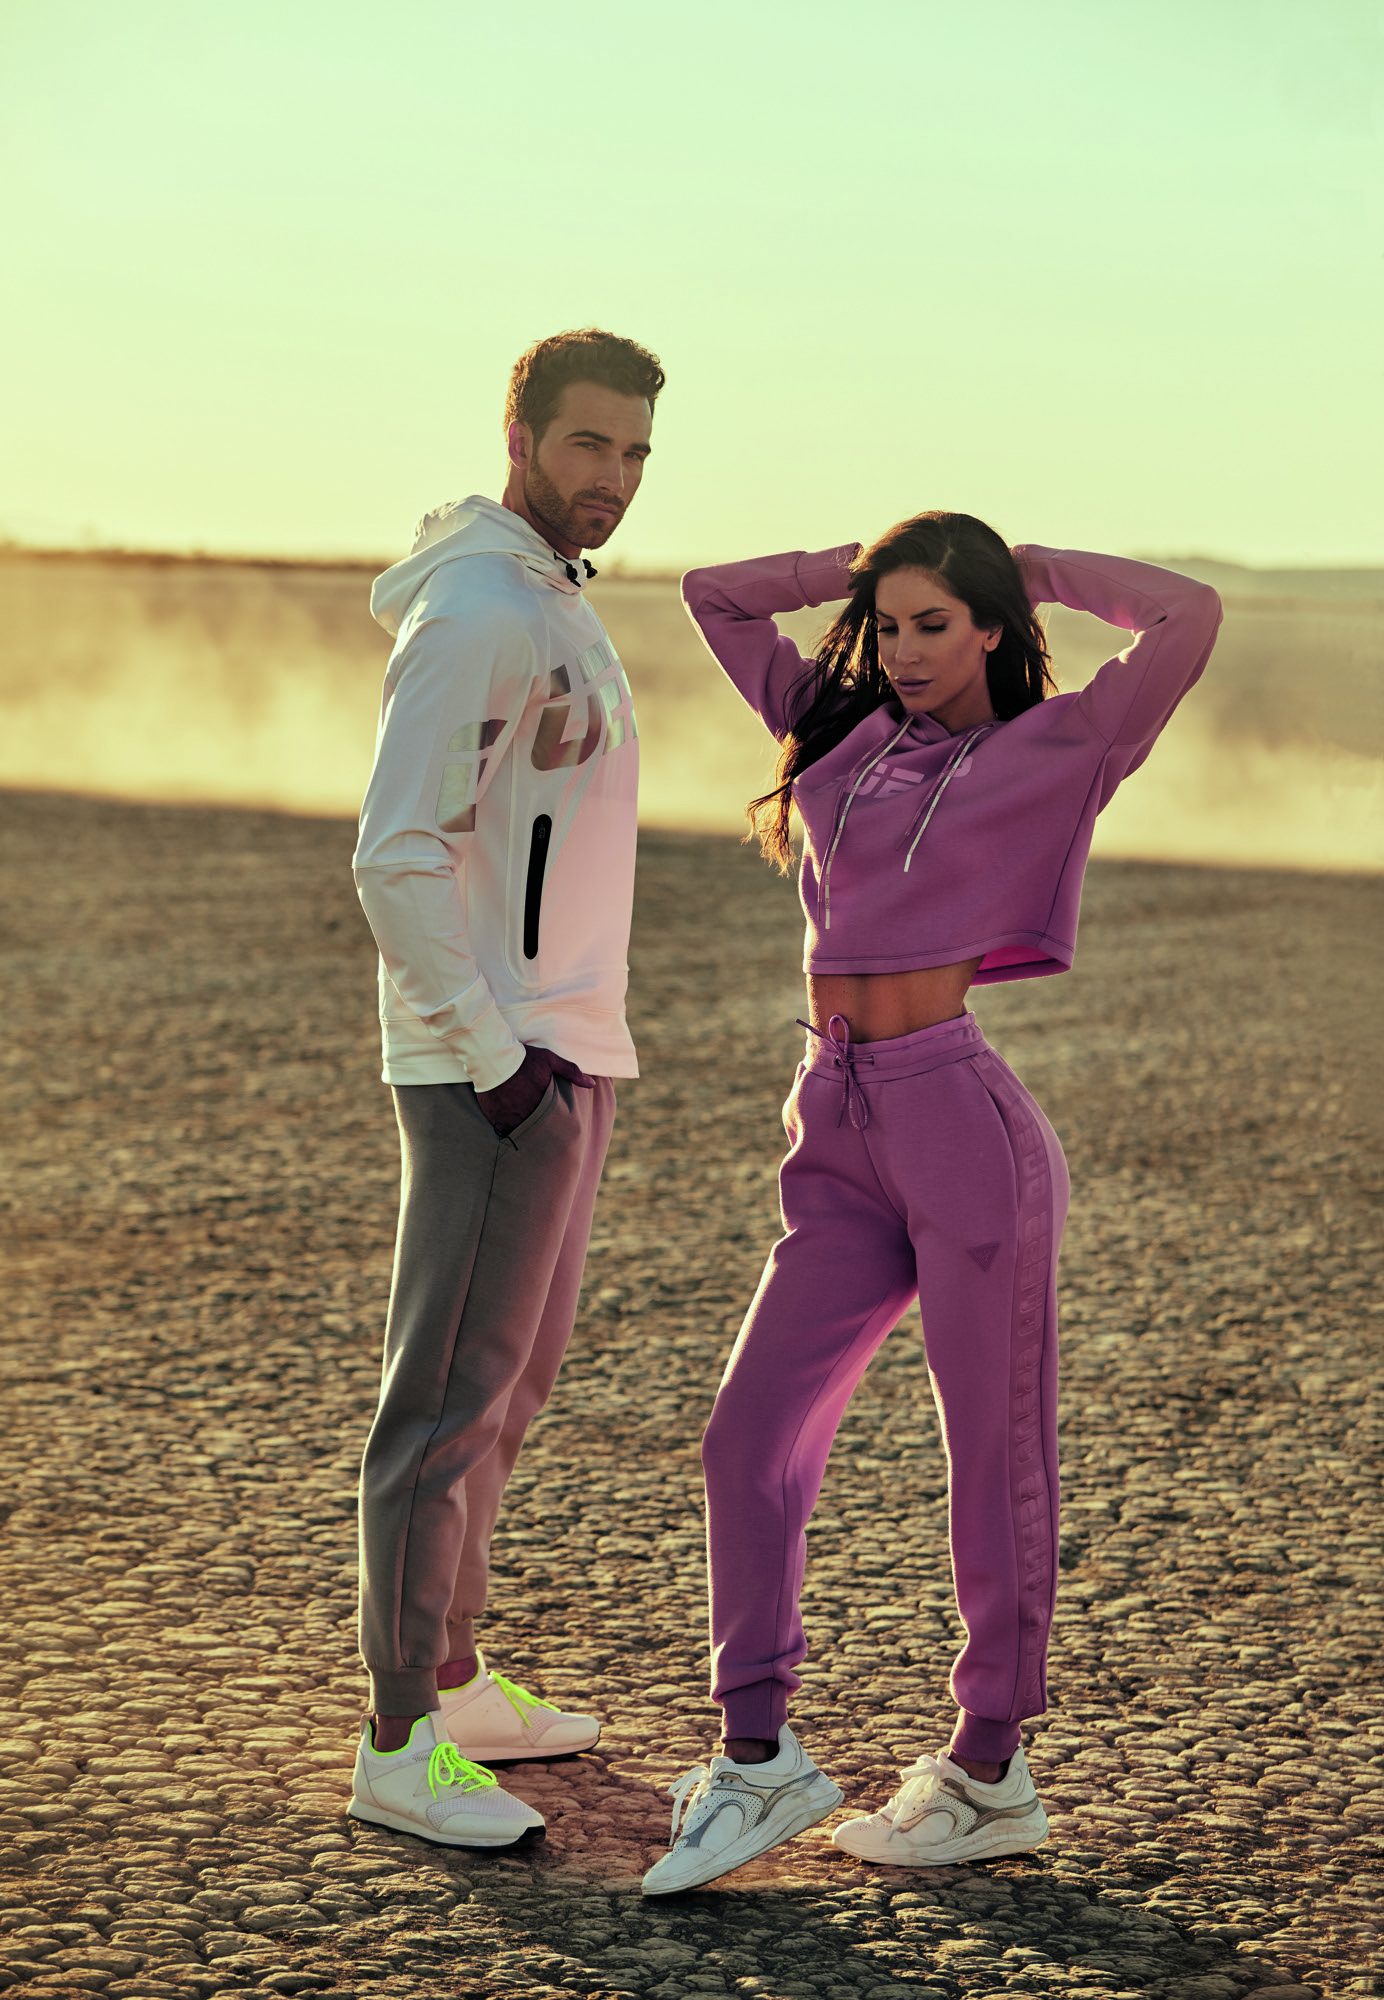 JEN SELTER STARS AS THE NEW FACE OF GUESS ACTIVEWEAR